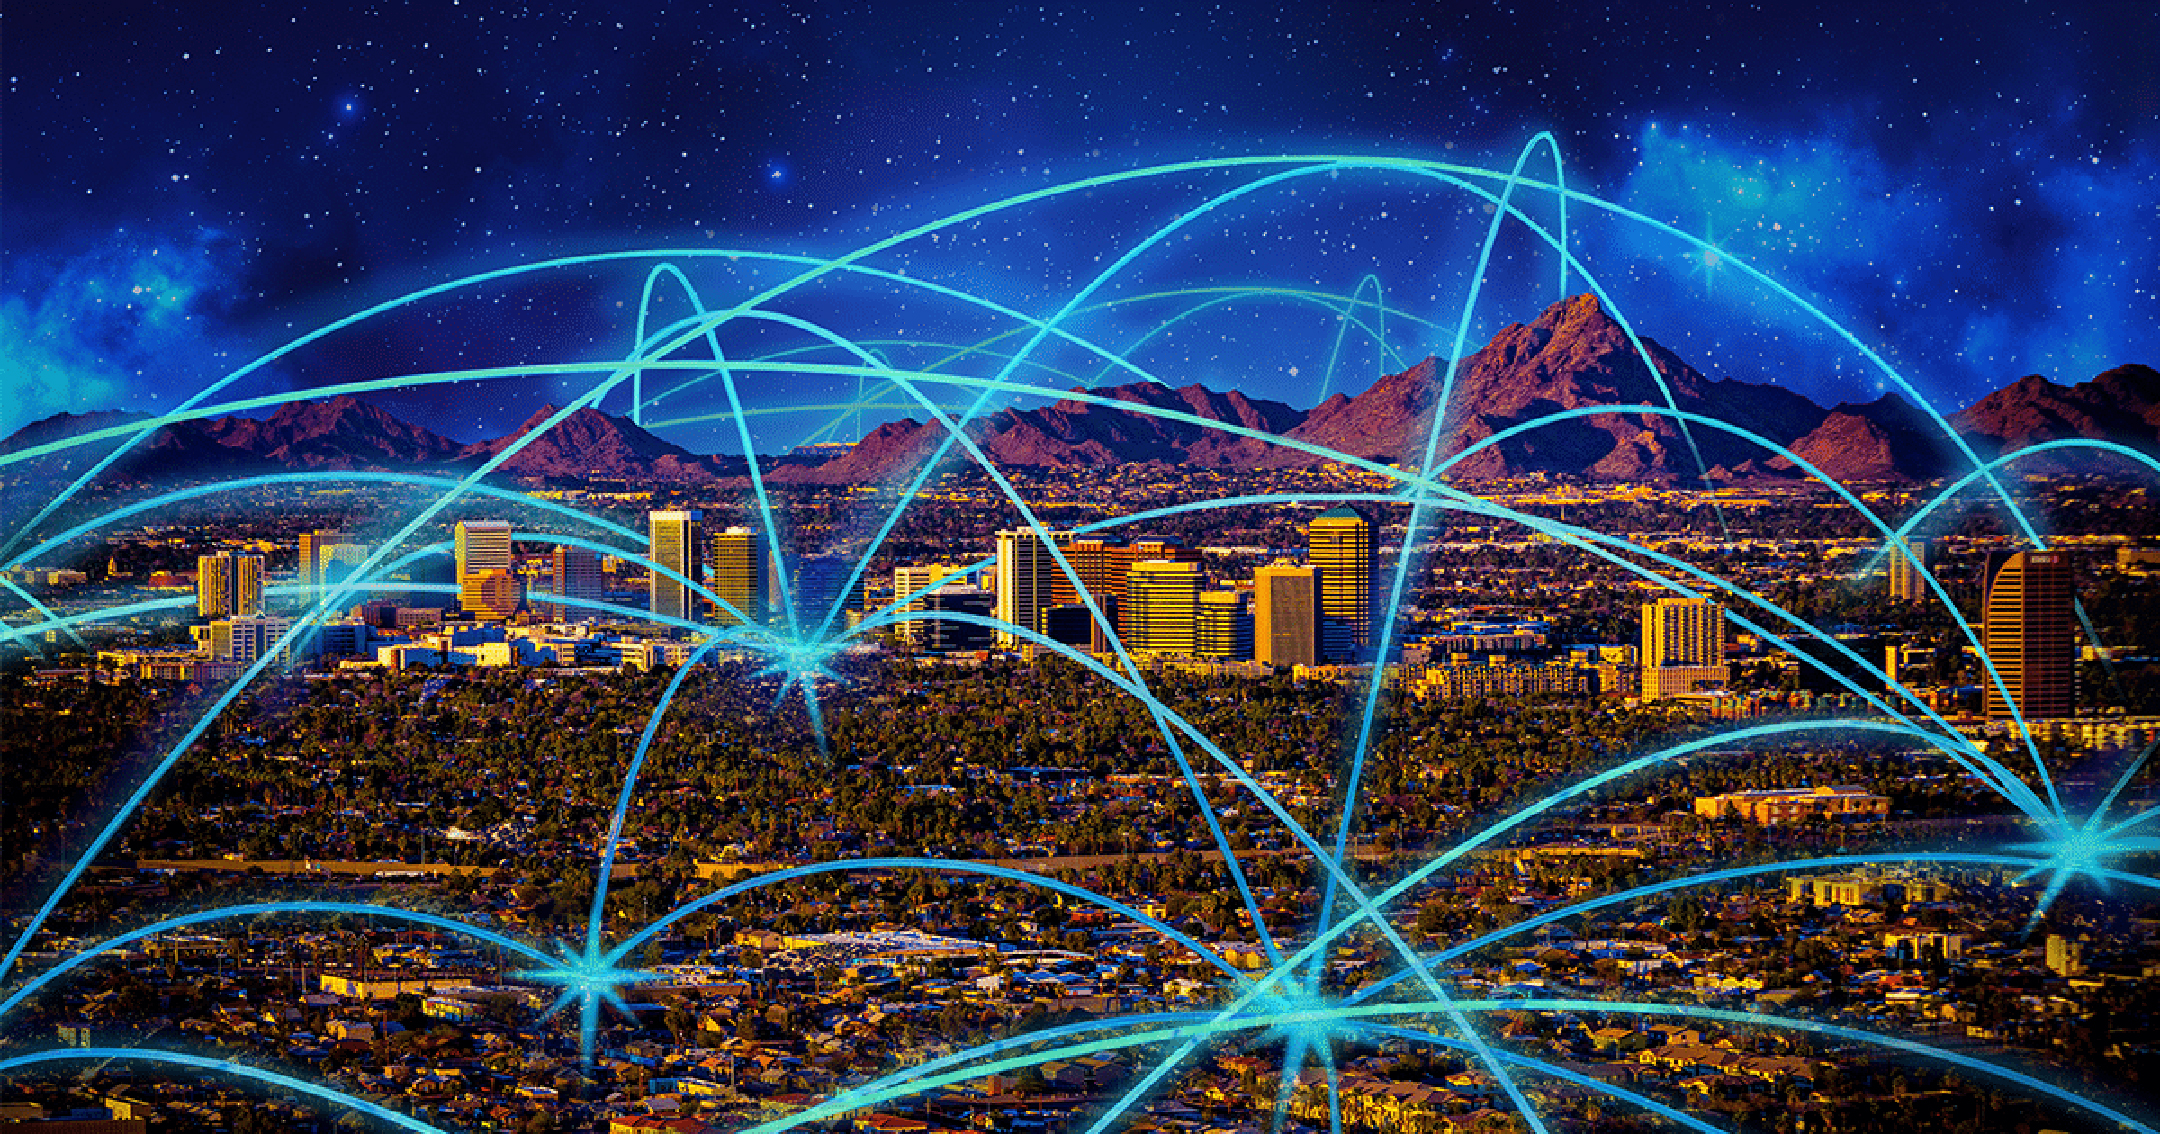 Illustration of the city of Phoenix with criss-crossing blue lines making arcs above it